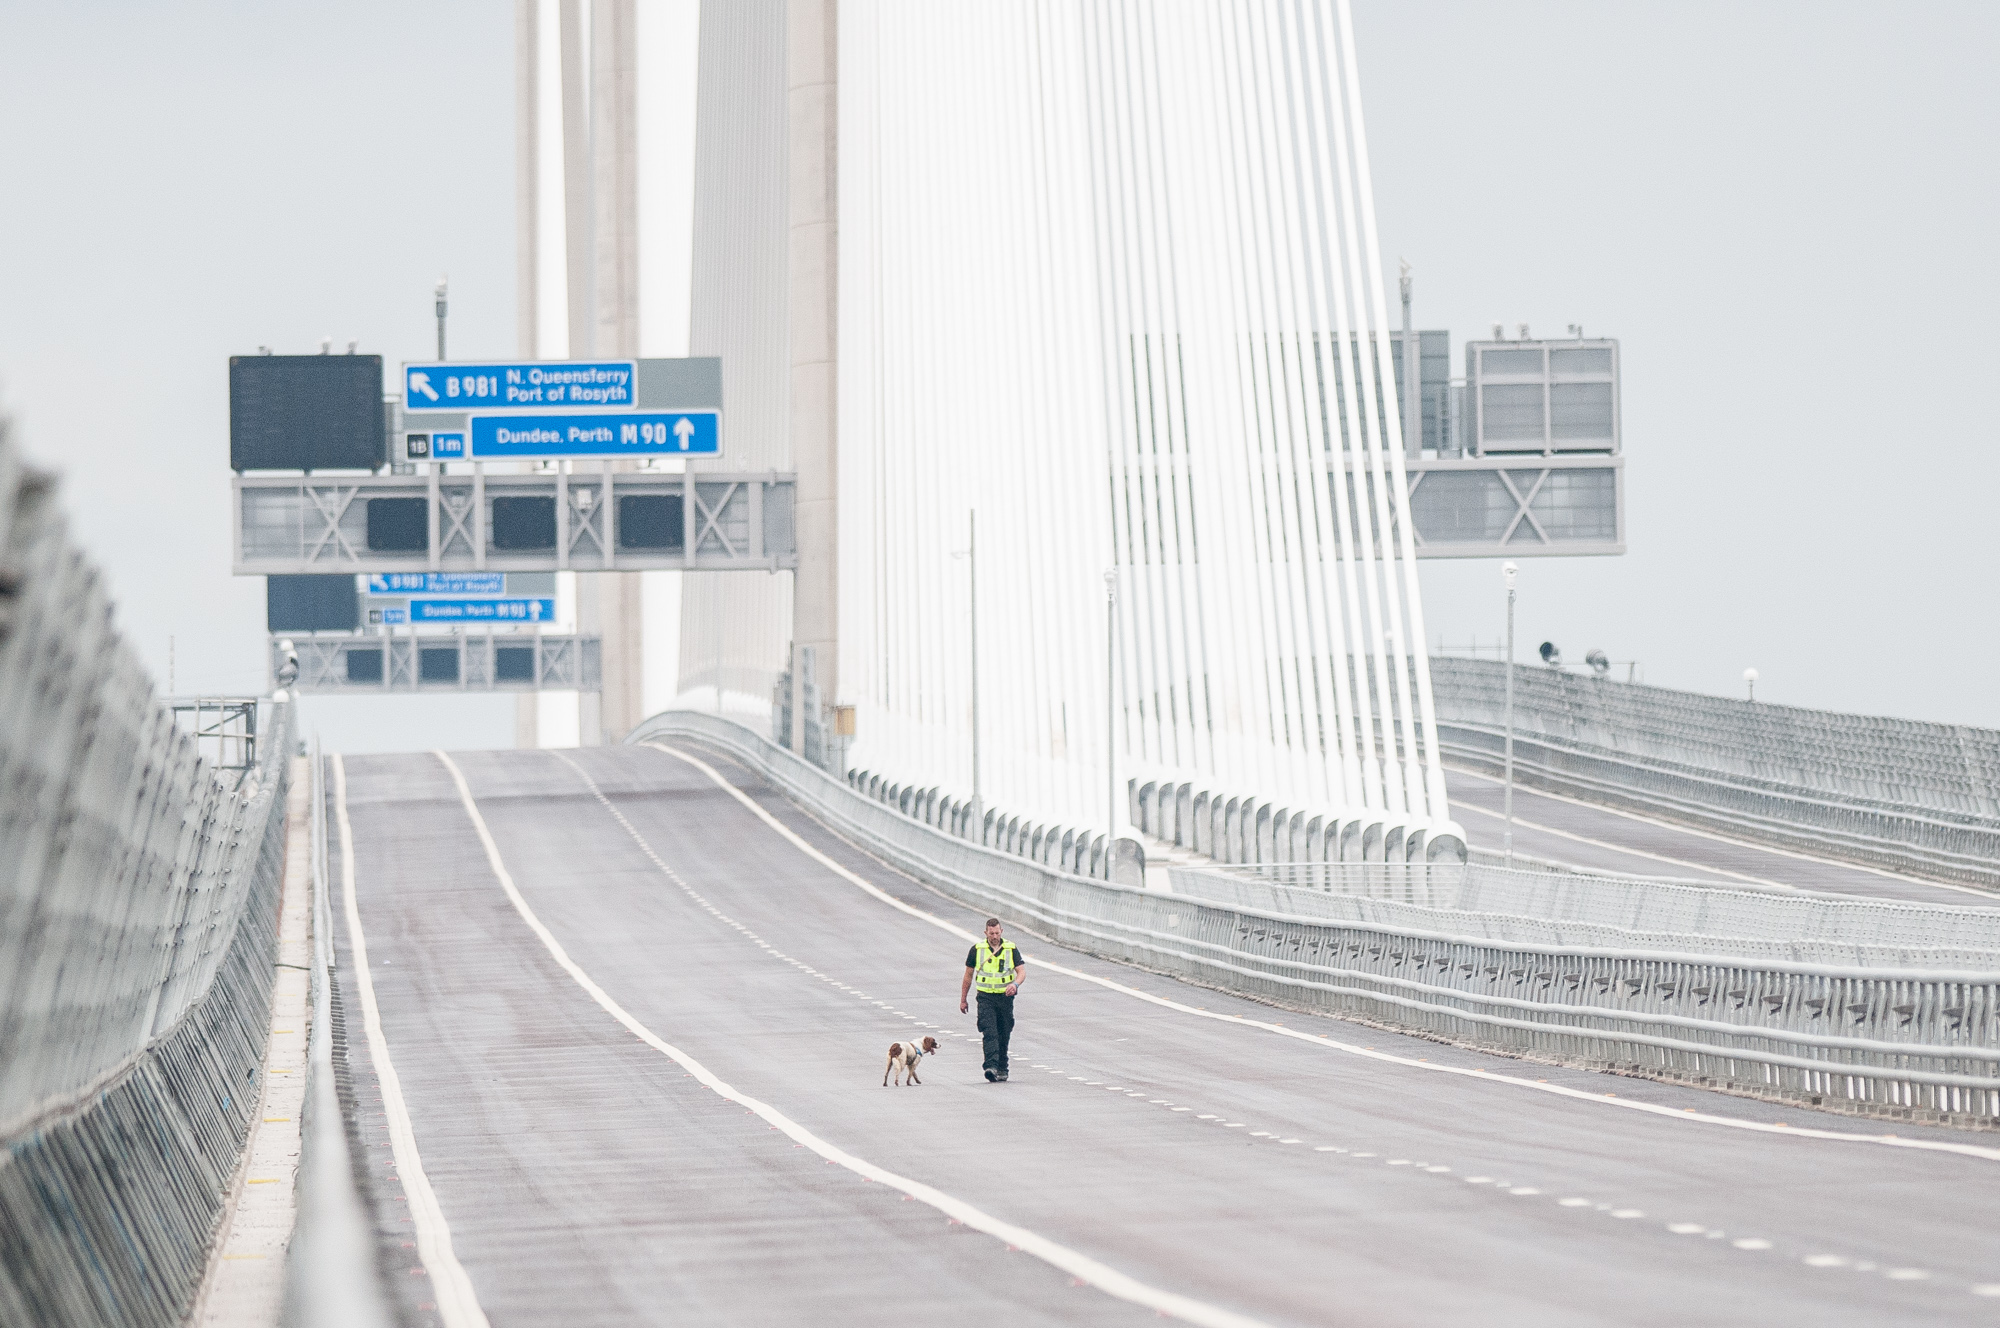 Queensferry Crossing image for Courier in Scotland company Eagle Couriers